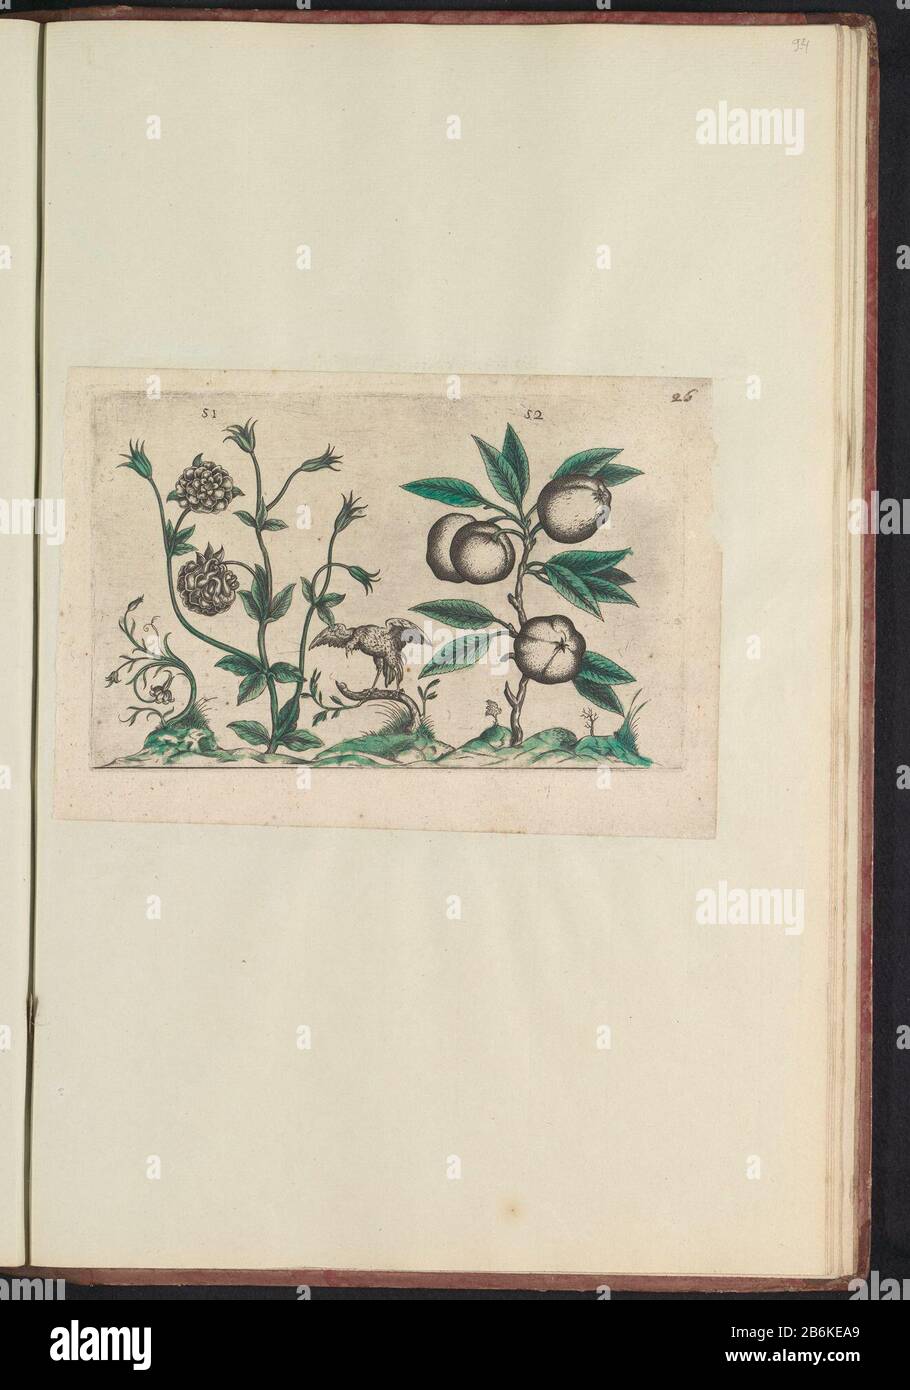 Double columbine (Aquilegia vulgaris), and apple (Malus pumila) Double columbine and apple. With a bird and some ornamental plants. Figs. 51 and 52, numbered on a leaf with the hand 26. In: Anselmi Boëtii the Boot I.C. Brugensis & Rodolphi II. Imp. Novel. a medical cubiculis Florum, Herbarum, ac fructuum selectiorum icones, and vires pleraeque hactenus ignotæ. Part of the album with sheets and plates from the Boodts herbarium of 1640. The twelfth twelve albums of watercolors of animals, birds and plants are known around 1600, commissioned by Emperor Rudolf II. Manufacturer : printmaker: anonym Stock Photo